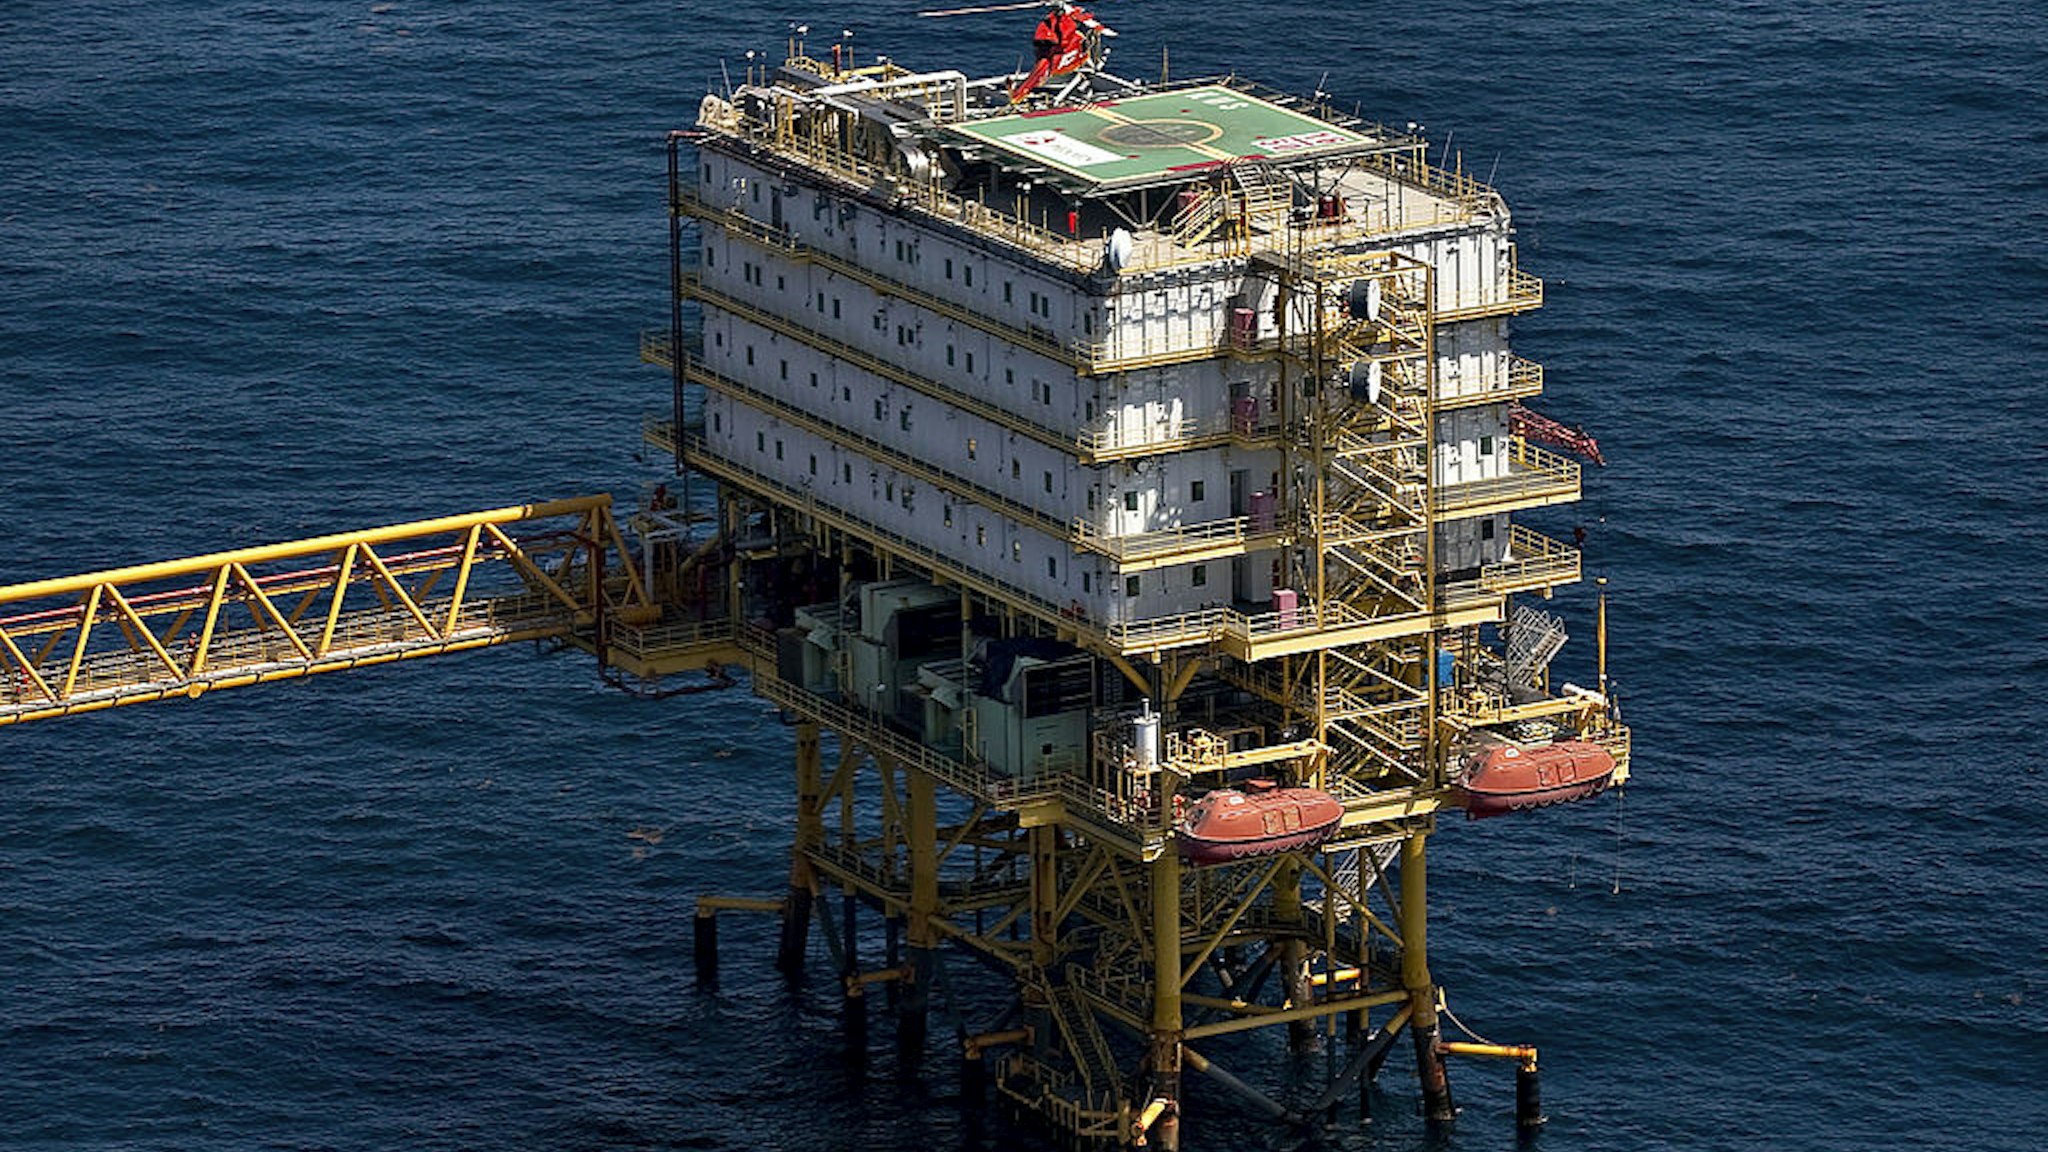 A helicopter lands on a habitation platform linked to a Petroleos Mexicanos offshore rig producing oil from the Ku-Maloob-Zaap field in the Gulf of Mexico 65 miles northeast of Ciudad del Carmen, Mexico, on Thursday, Oct. 7, 2010.